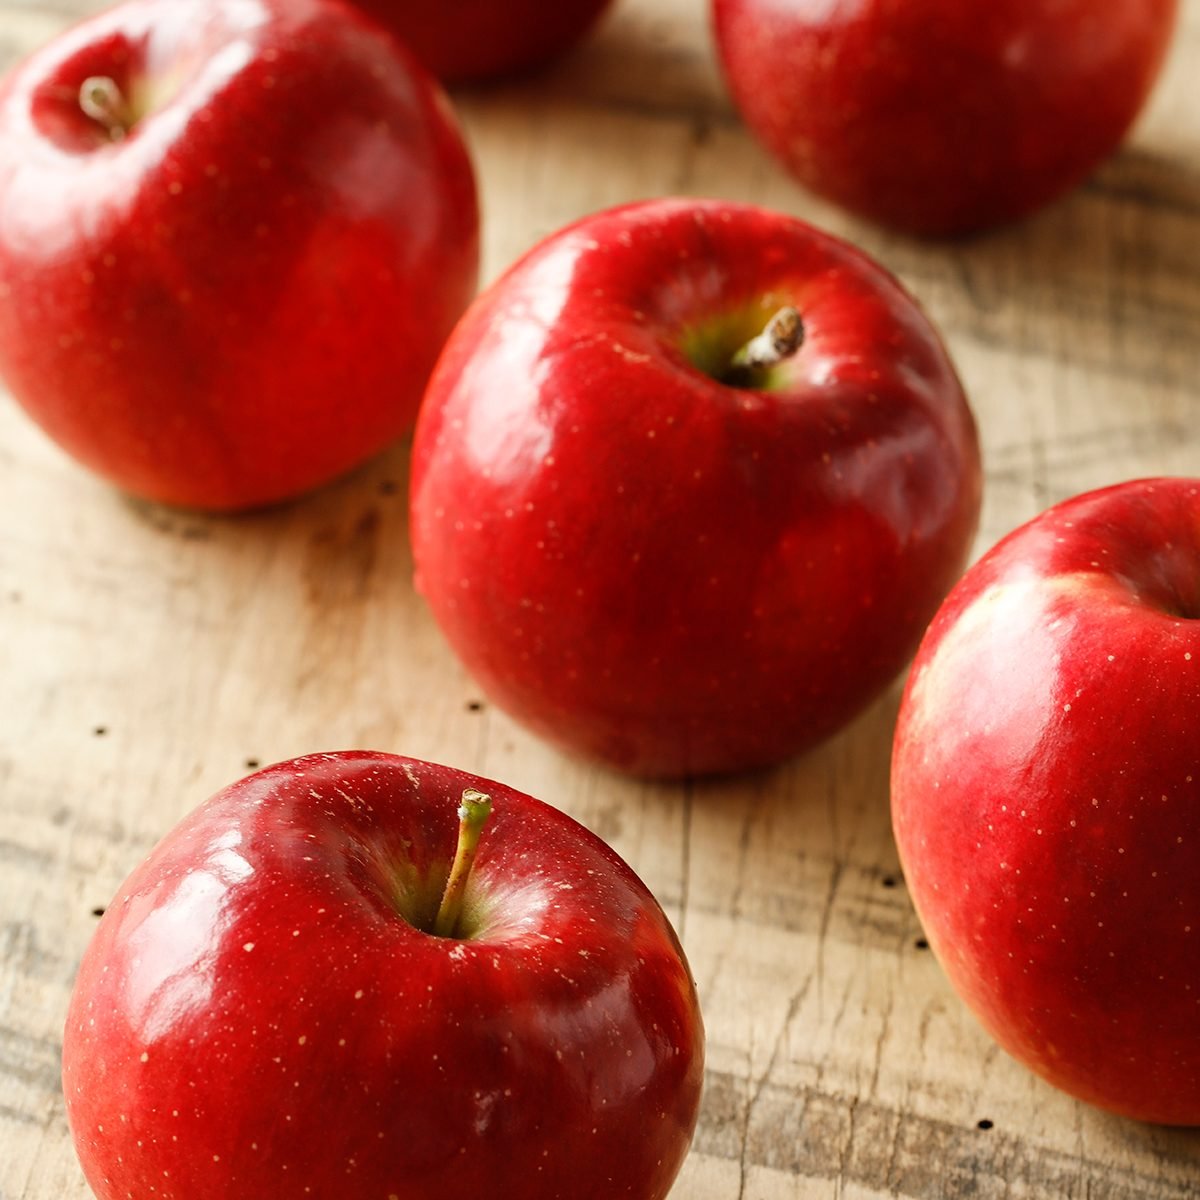 15 New Types Of Apples You Should Be Buying